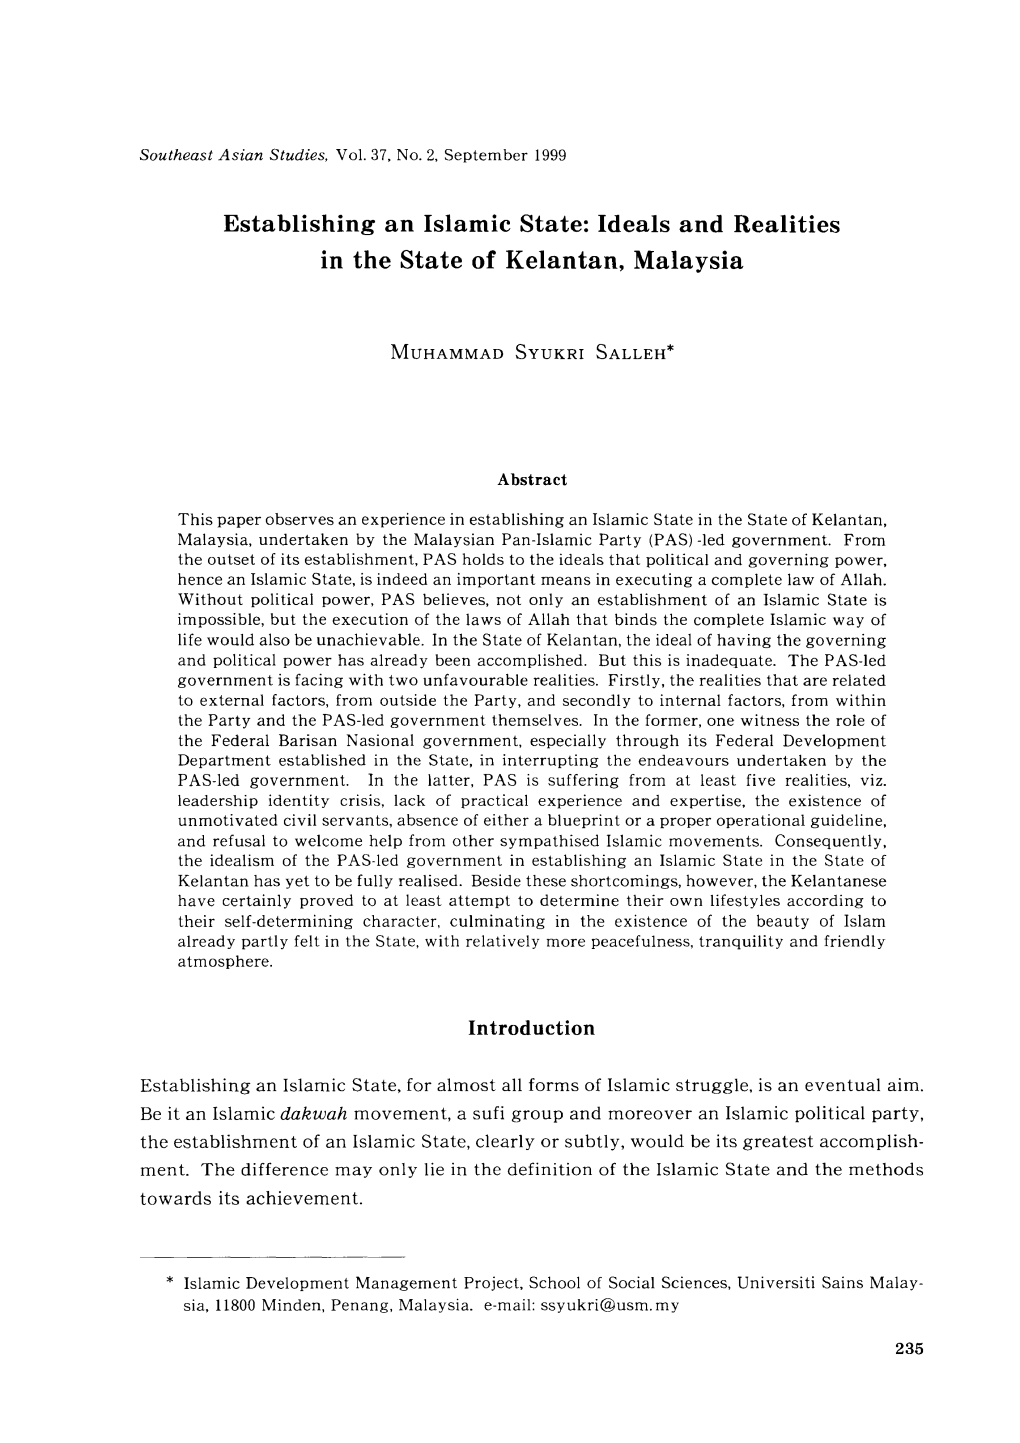 Ideals and Realities in the State of Kelantan, Malaysia